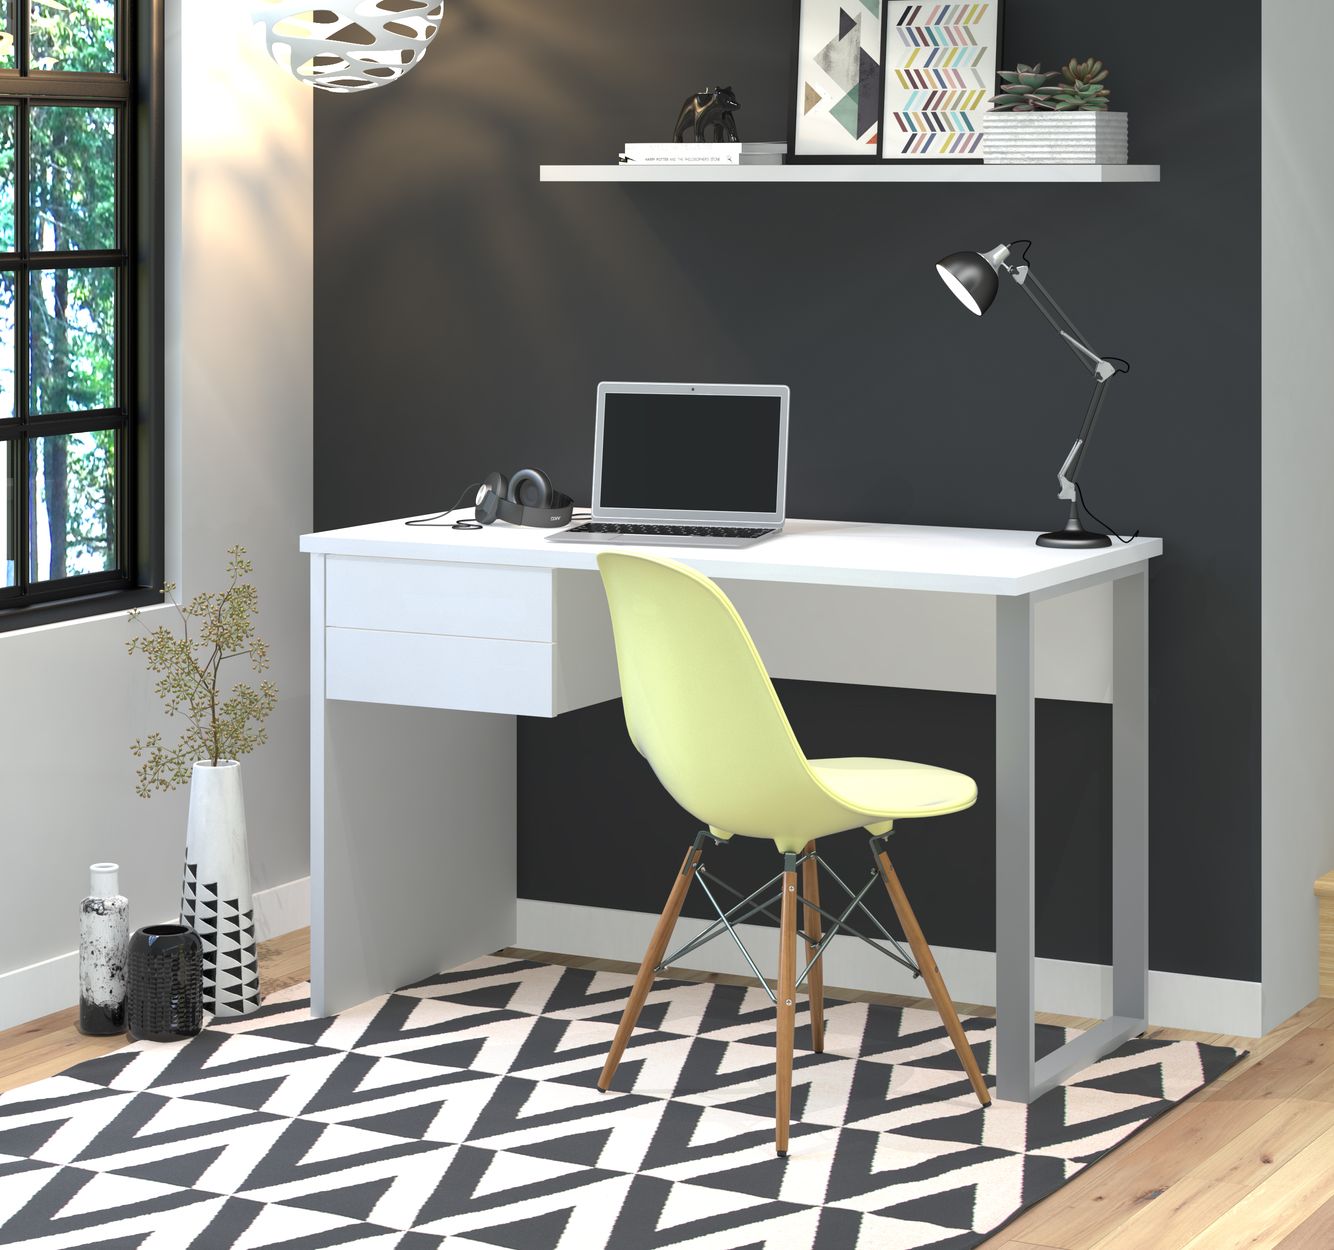 4 Simple Ways to Liven up Your Workspace